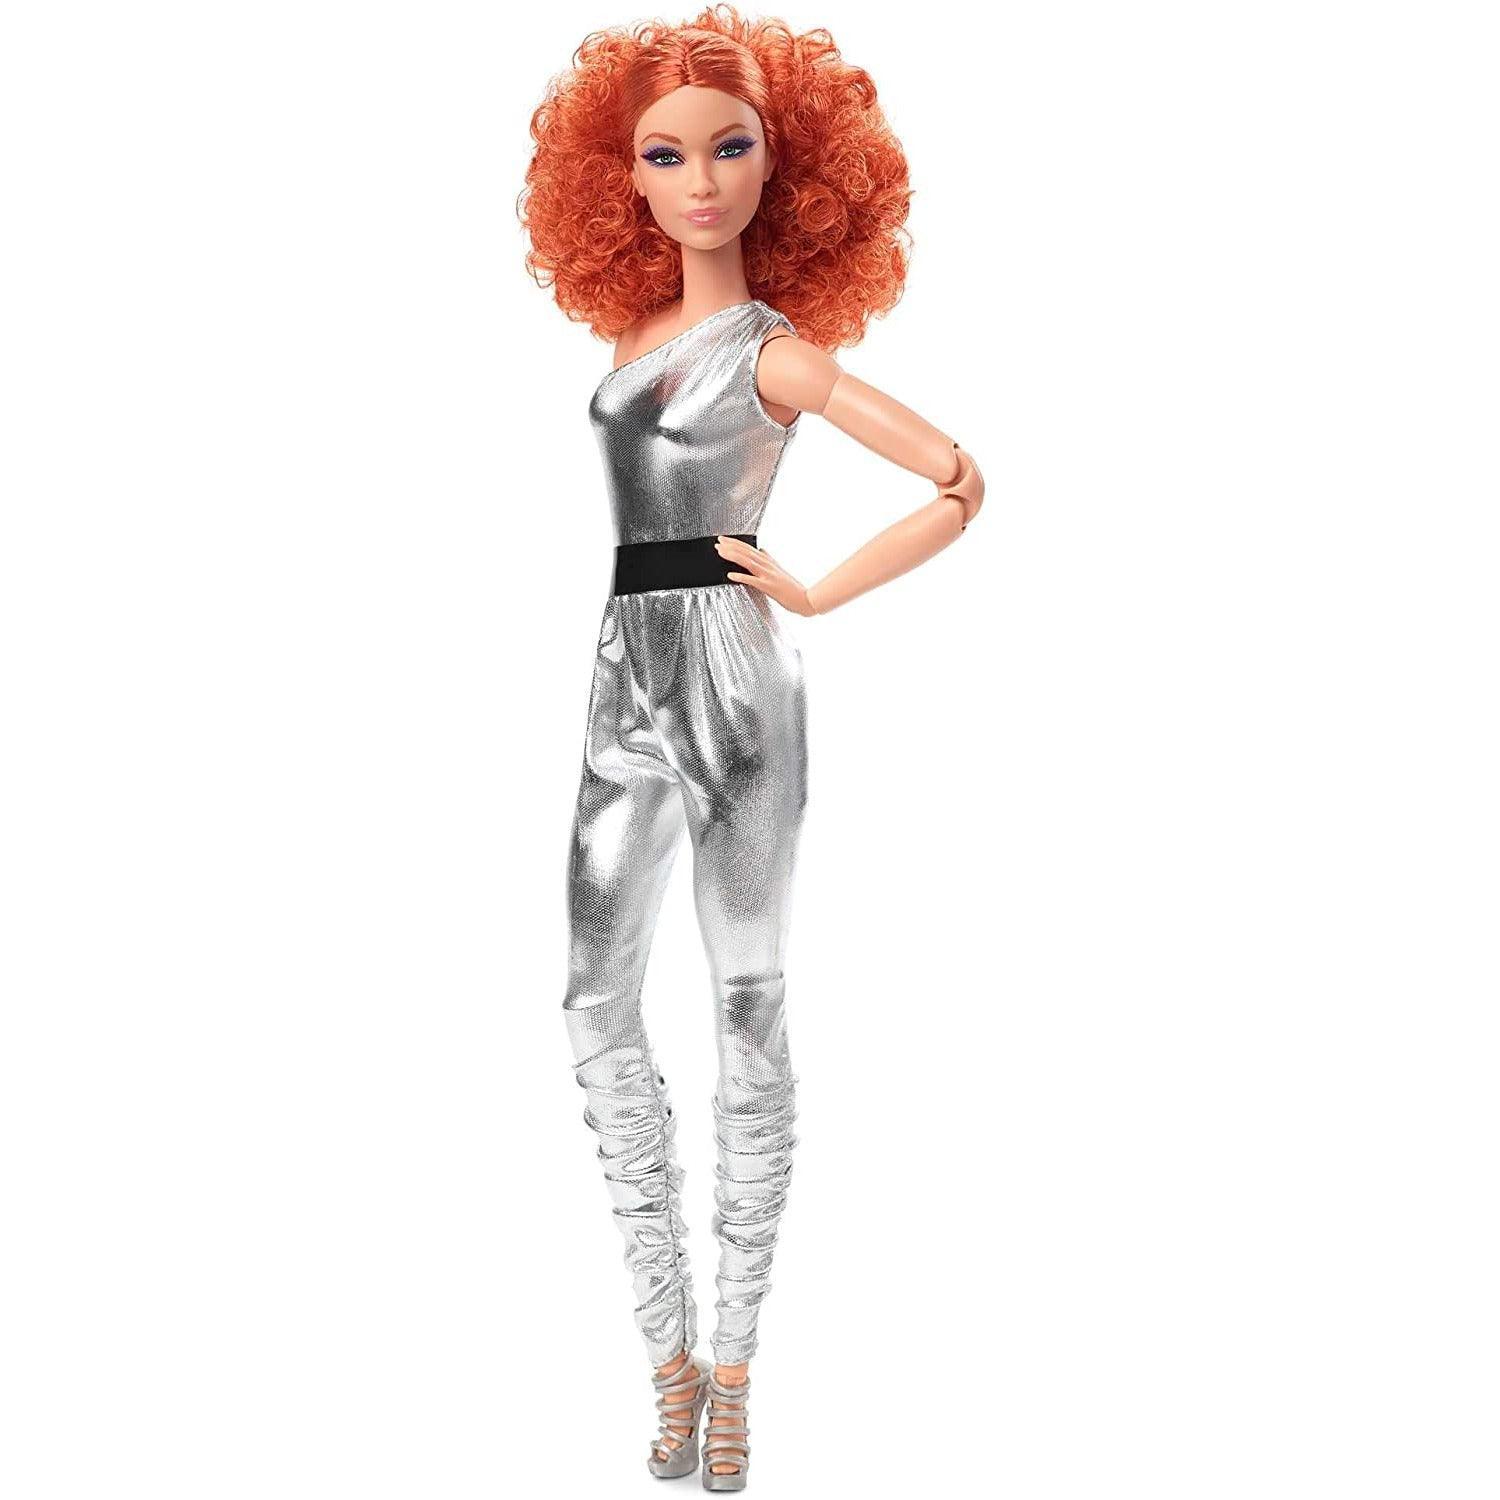 Barbie Signature Barbie Looks Doll (Red Curly Hair, Original Body Type), Fully Posable Fashion Doll - BumbleToys - 5-7 Years, Barbie, Fashion Dolls & Accessories, Girls, Pre-Order